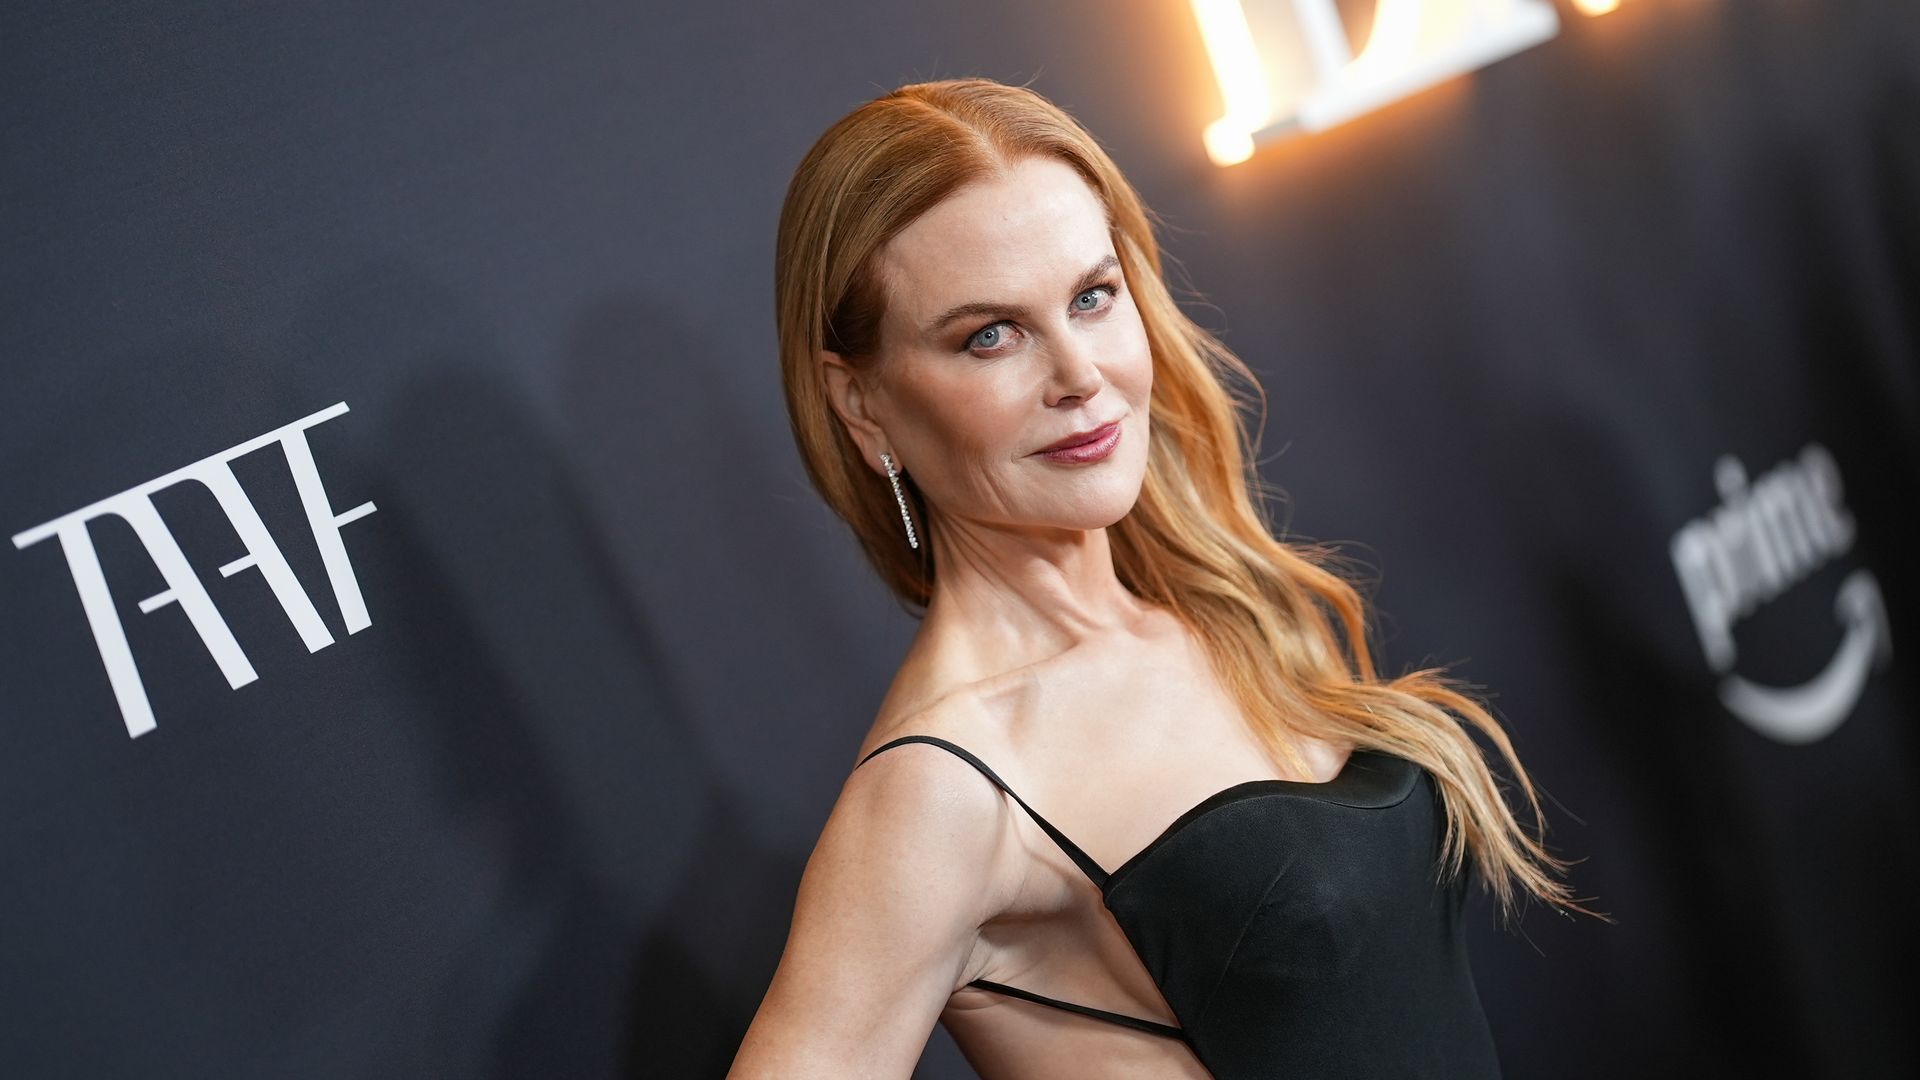 Nicole Kidman, 56, steals the show in an incredibly revealing dress - see best photos